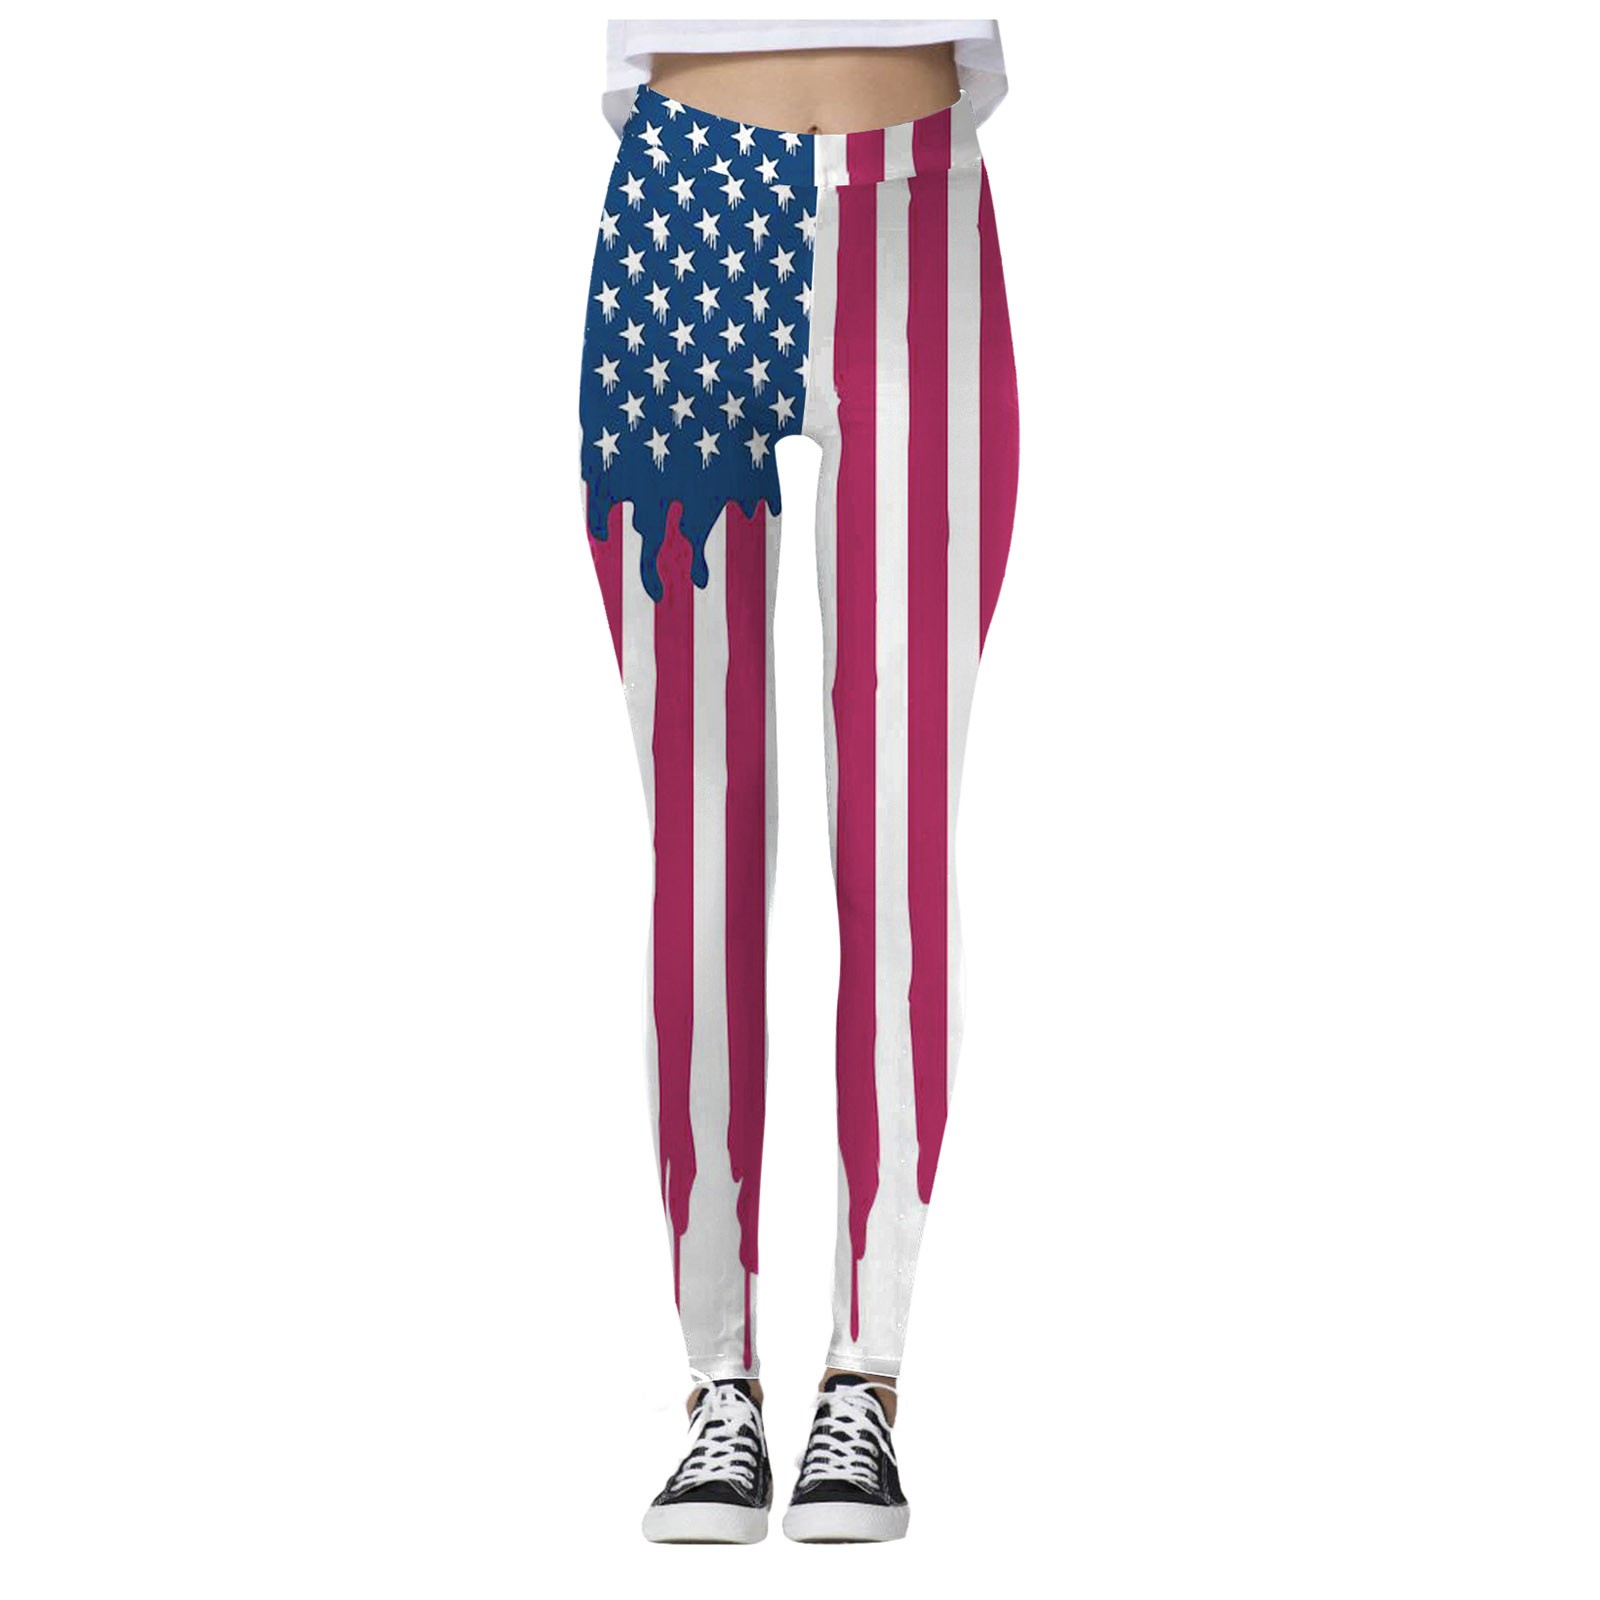 Hueihxs Women's Independence Day Tie Dye Printed Leggings Butt Lifting ...